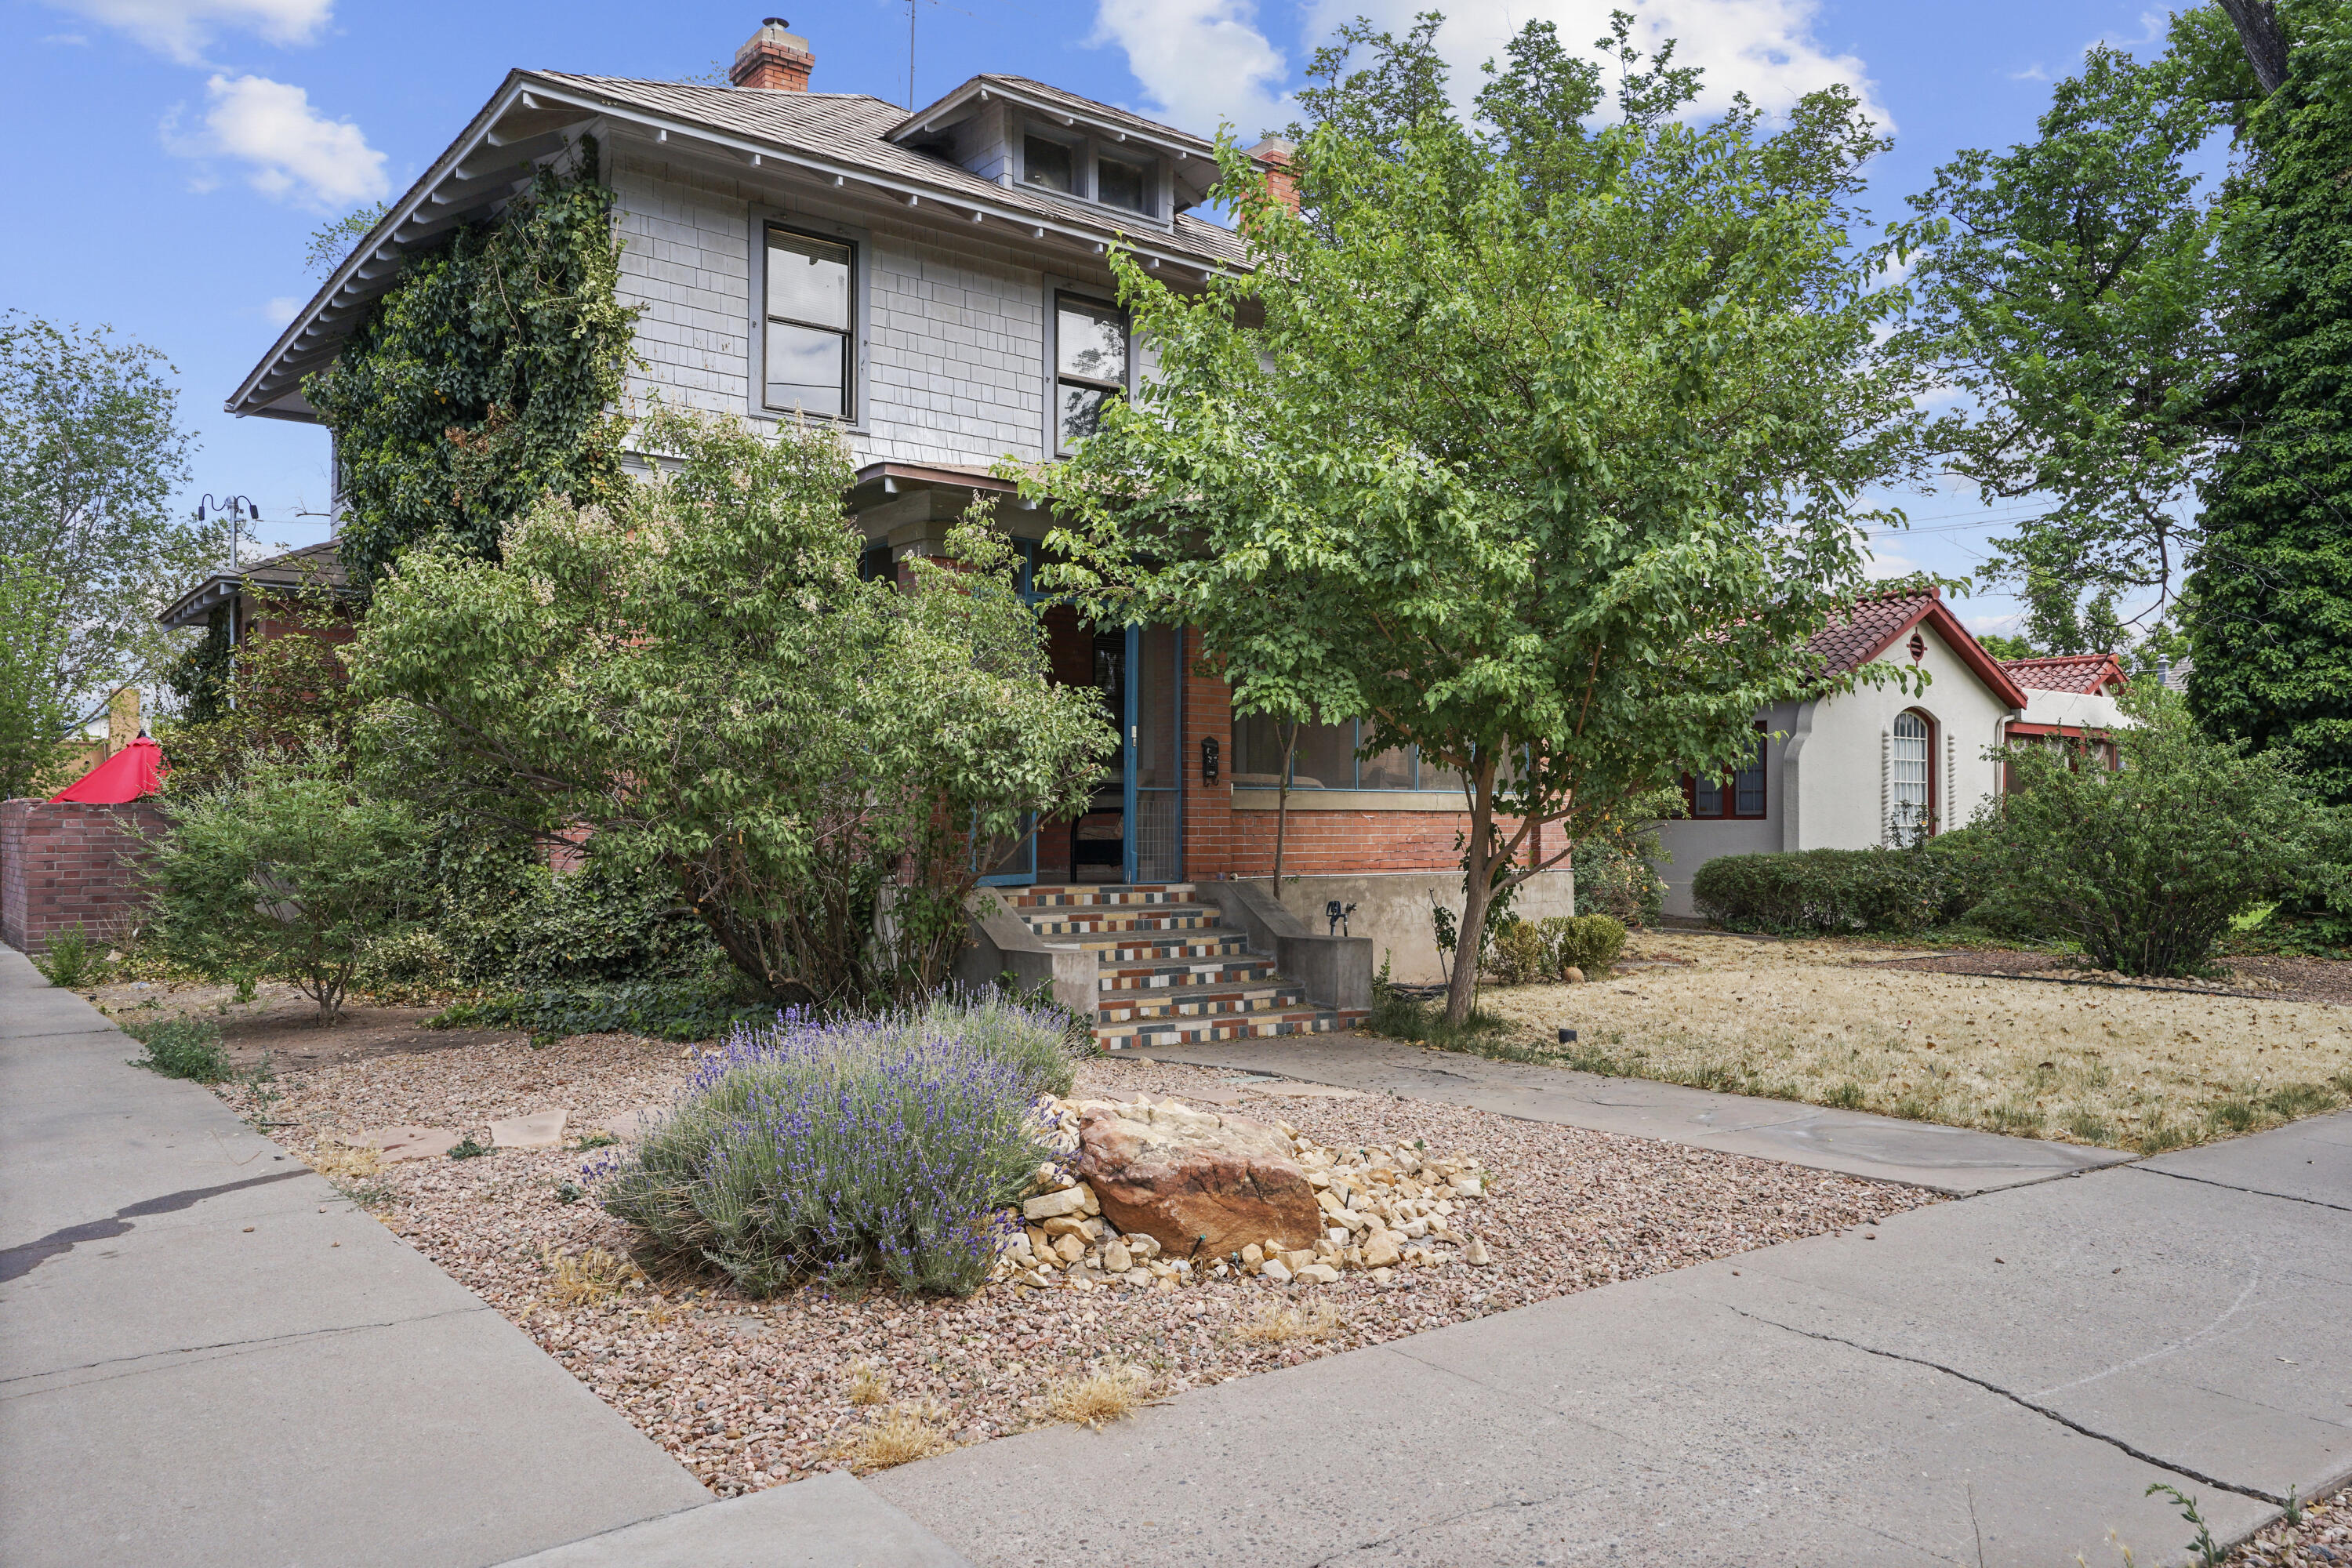 Located in Albuquerque's Historic Downtown Neighborhood! Situated on a large corner lot with mature shade trees! Built in 1915, this home is full of charming must-see details. There are two living areas, a formal dining room, a wood-burning brick fireplace, and Raised ceilings on the main level. Sliding pocket doors separate the living and dining space making it a perfect place to entertain. There are five bedrooms and one full bath located upstairs. You will also find an unfinished basement with Laundry hookups. An oversized window in the kitchen allows natural light to flow into the space as you cook your favorite meals. Relax on the screened-in front porch while enjoying a morning cup of coffee or evening sunset. Close distance to Old Town, Museums, Aquarium, Downtown, and Restaurants